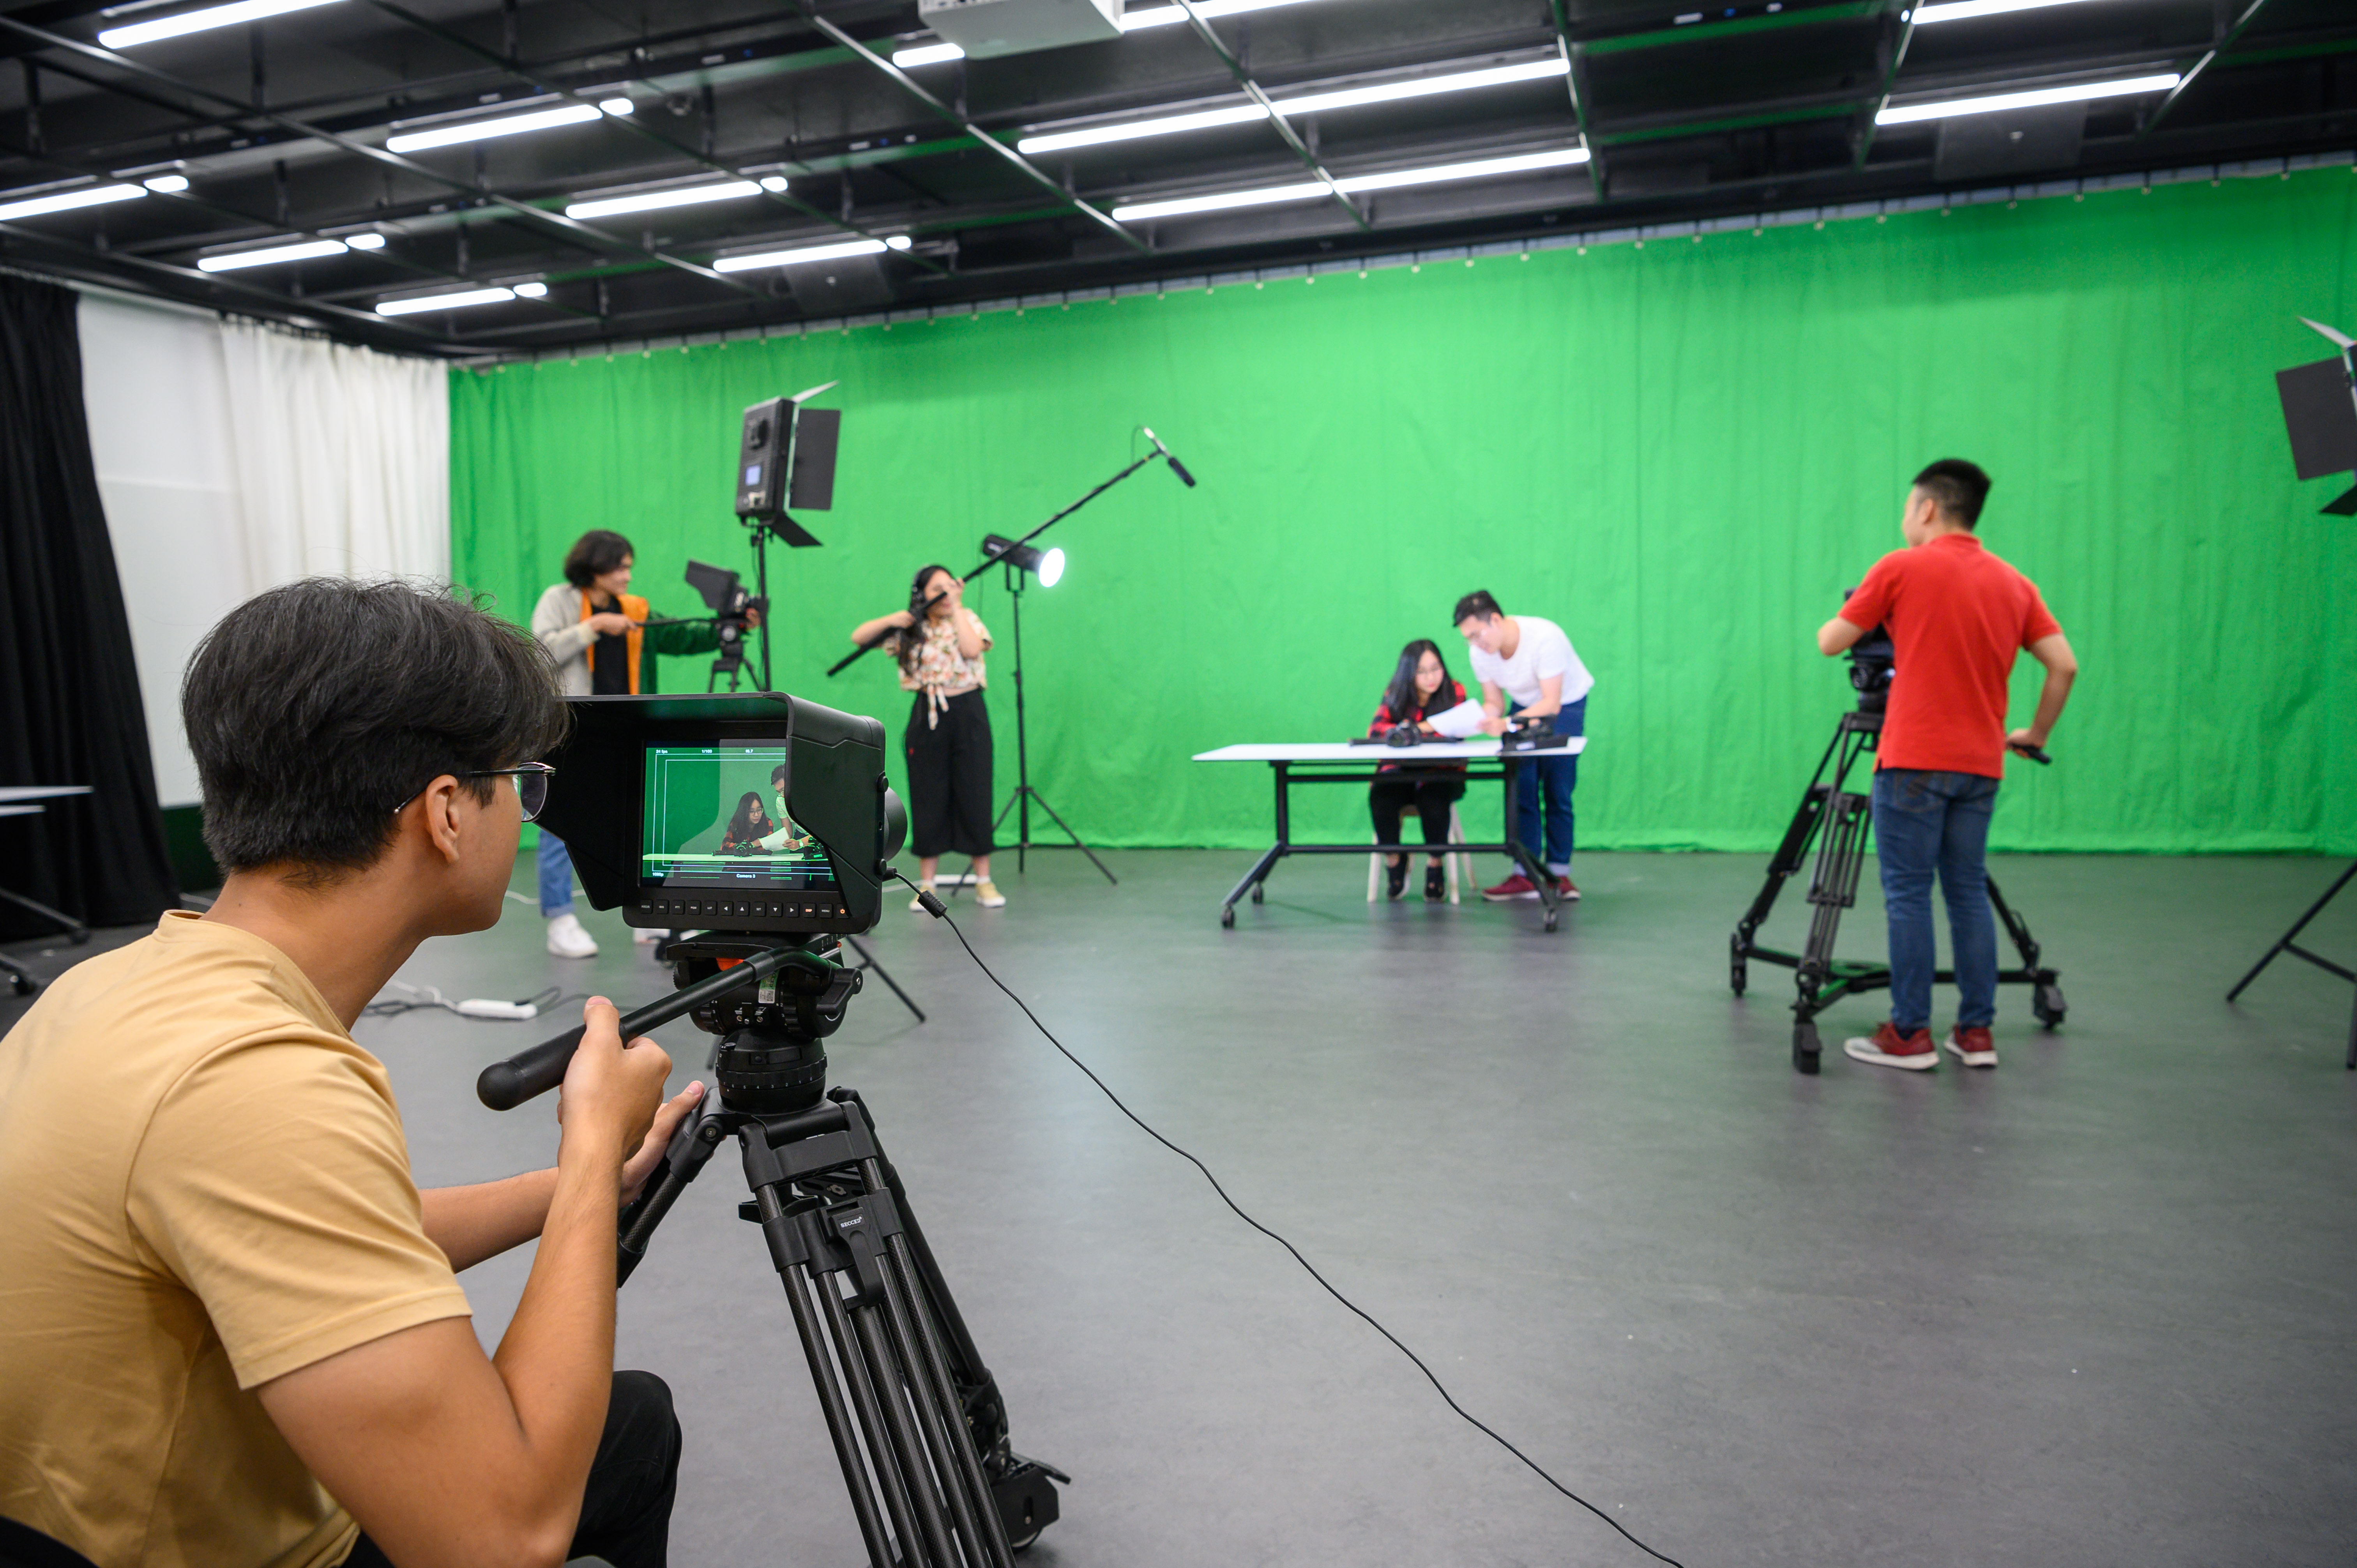 Digital Film and Video students will get to learn and practice in a media studio, which is fully equipped with cameras, lighting and vision mixing equipment.